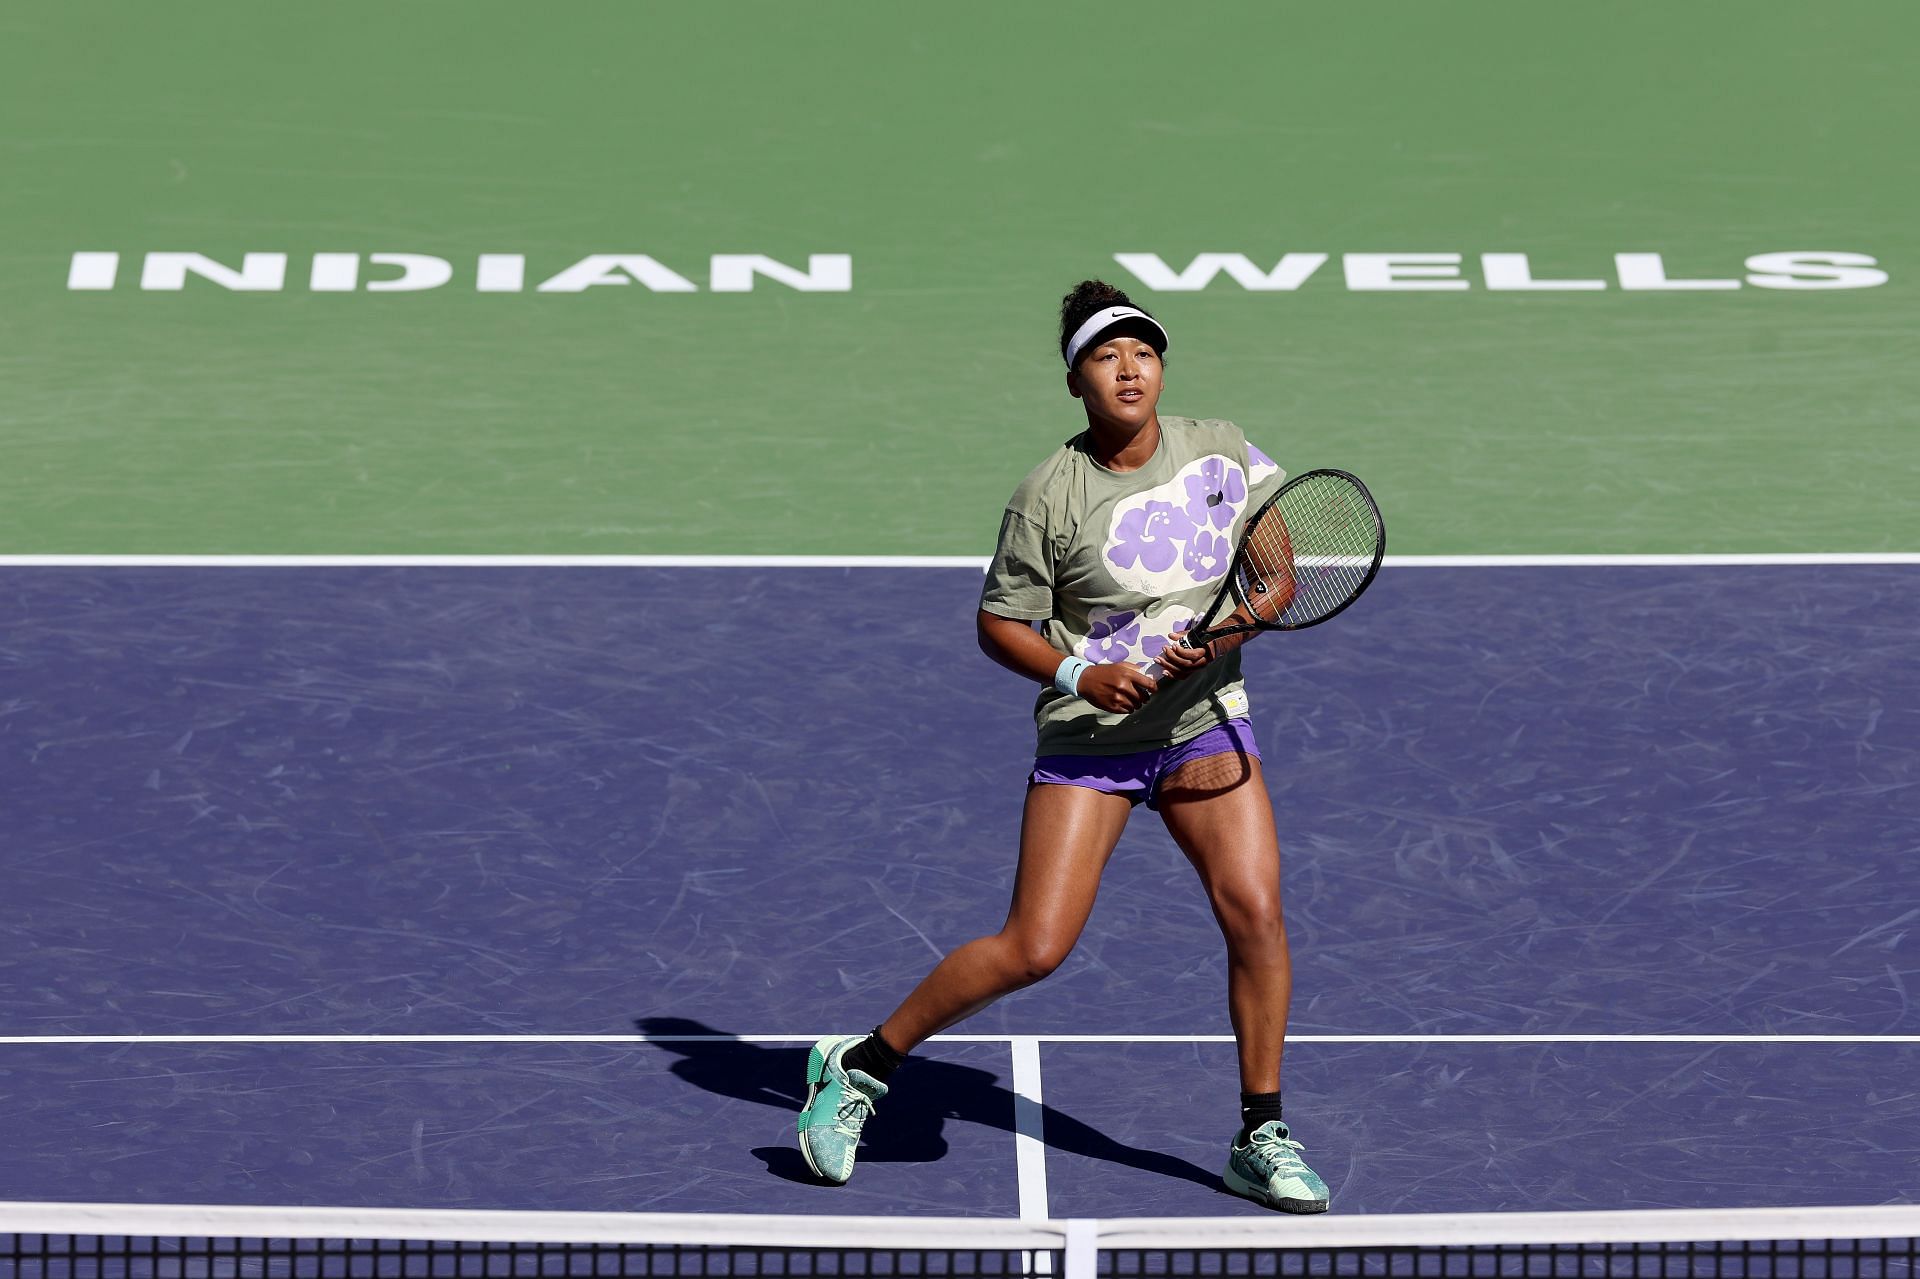 Naomi Osaka practices ahead of the BNP Paribas Open at Indian Wells Tennis Garden - Getty Images